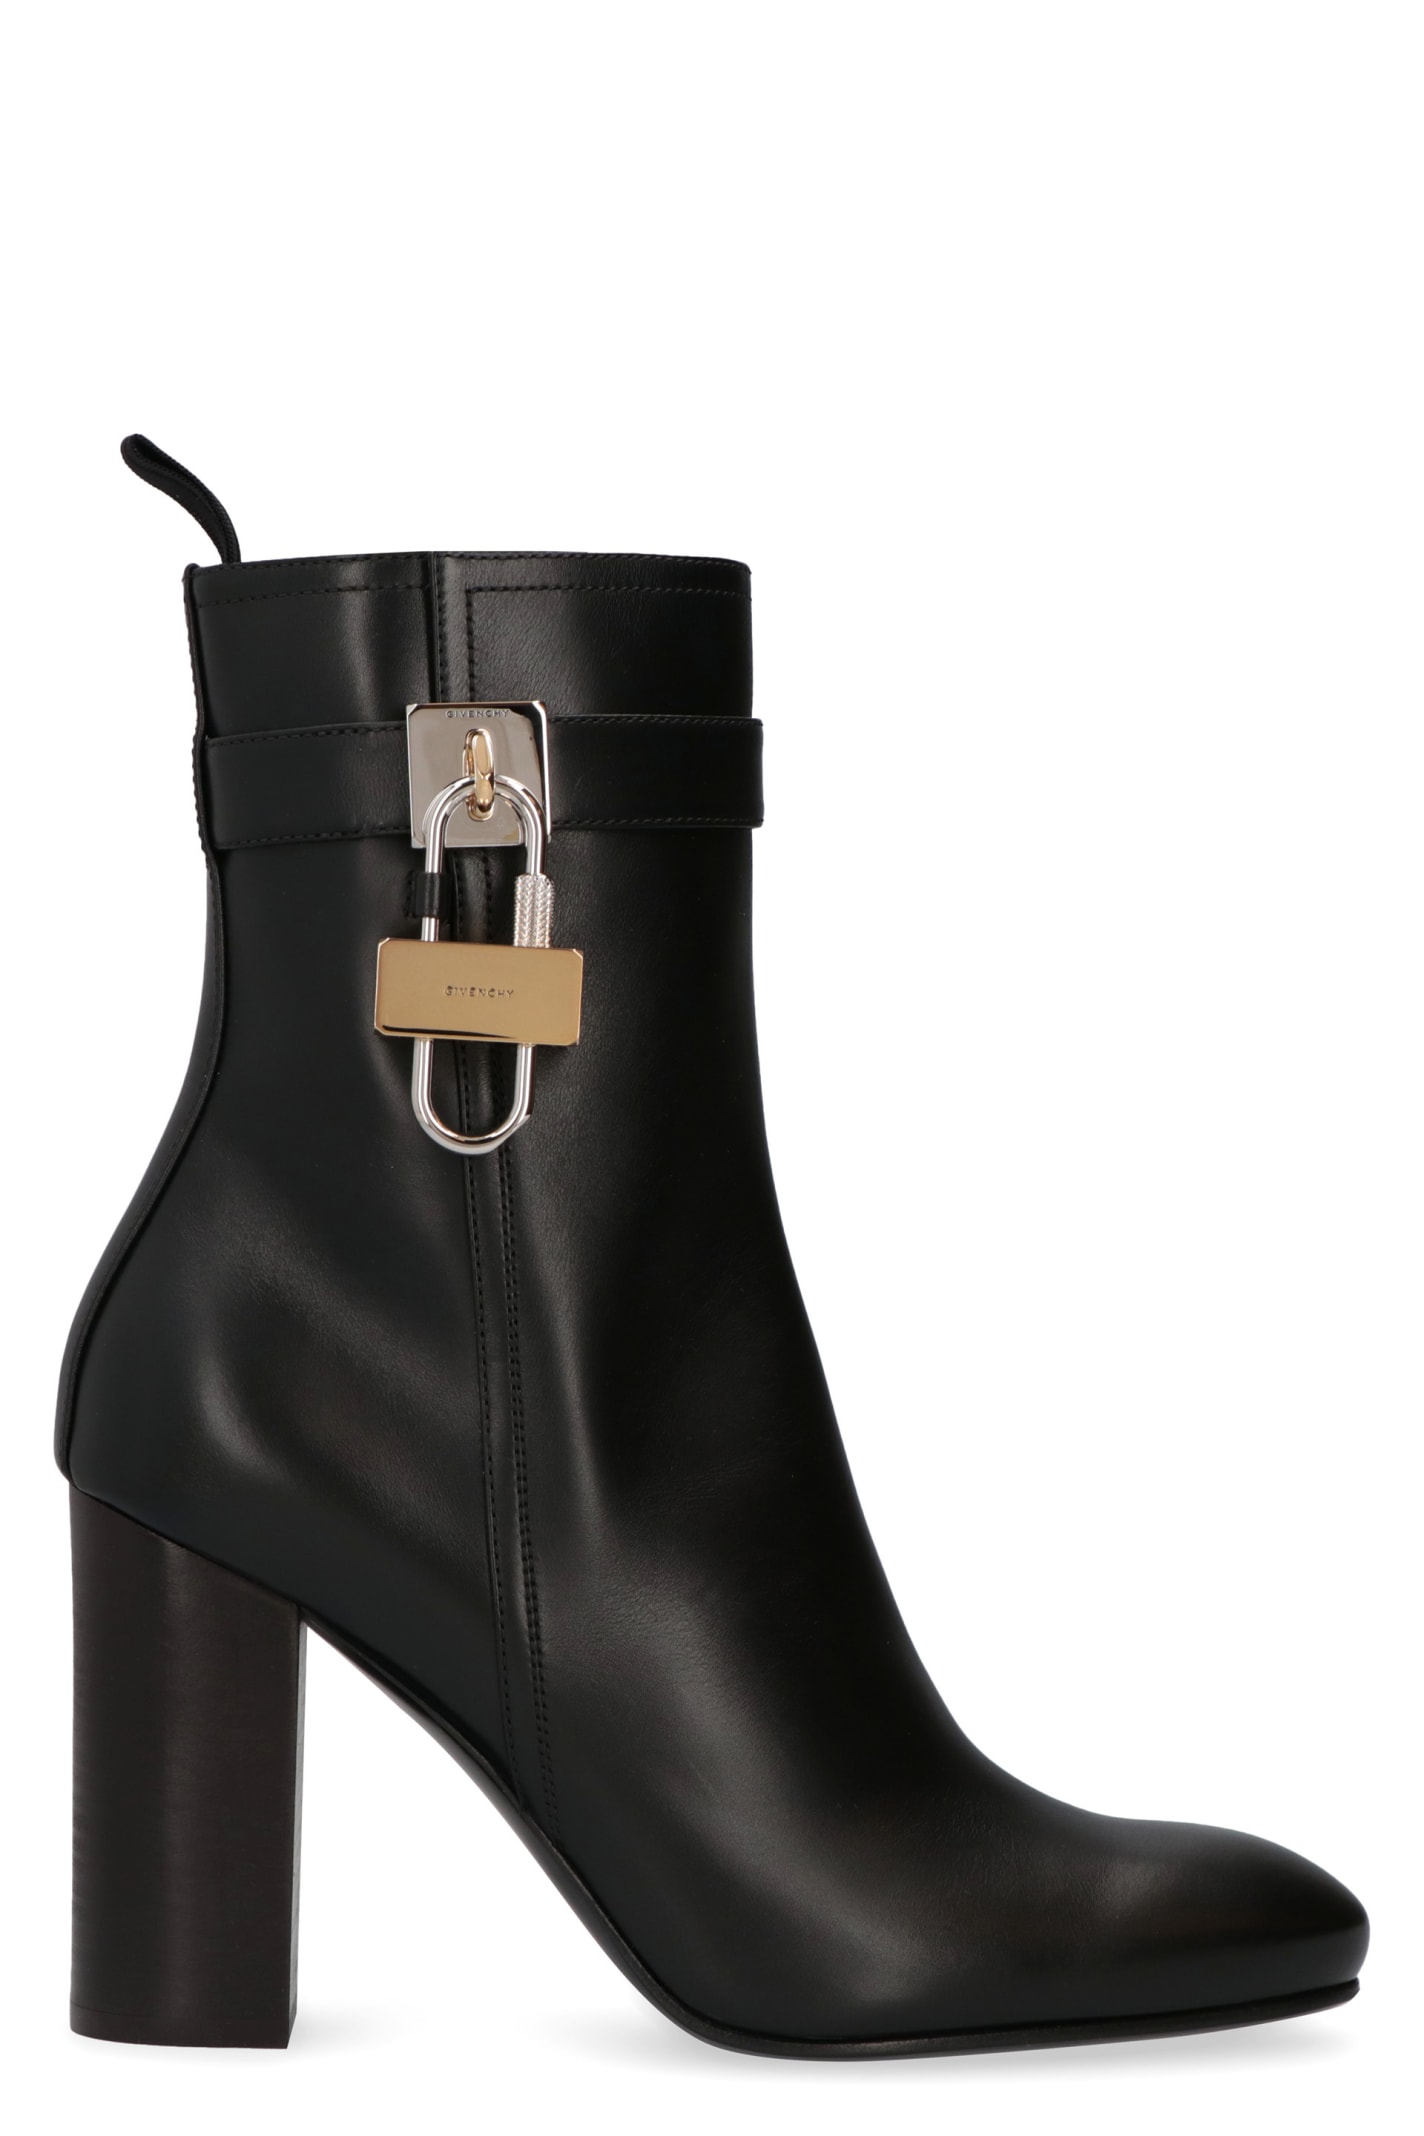 Givenchy Lock Leather Ankle Boots